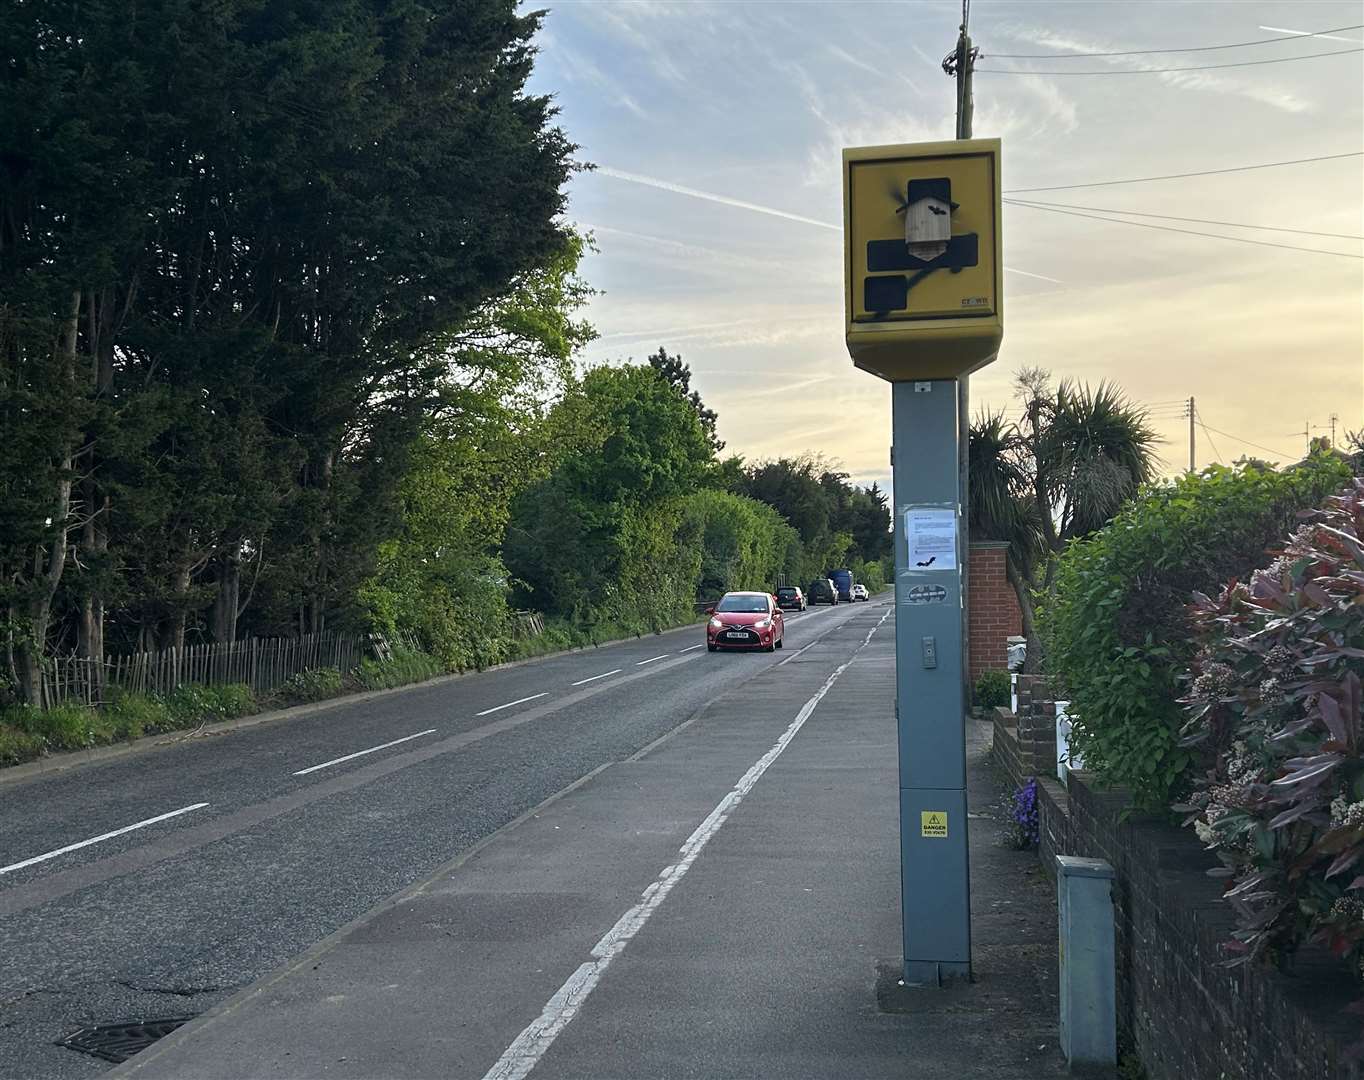 A bat box has been fitted to the speed camera in Hollywood Lane, Wainscott